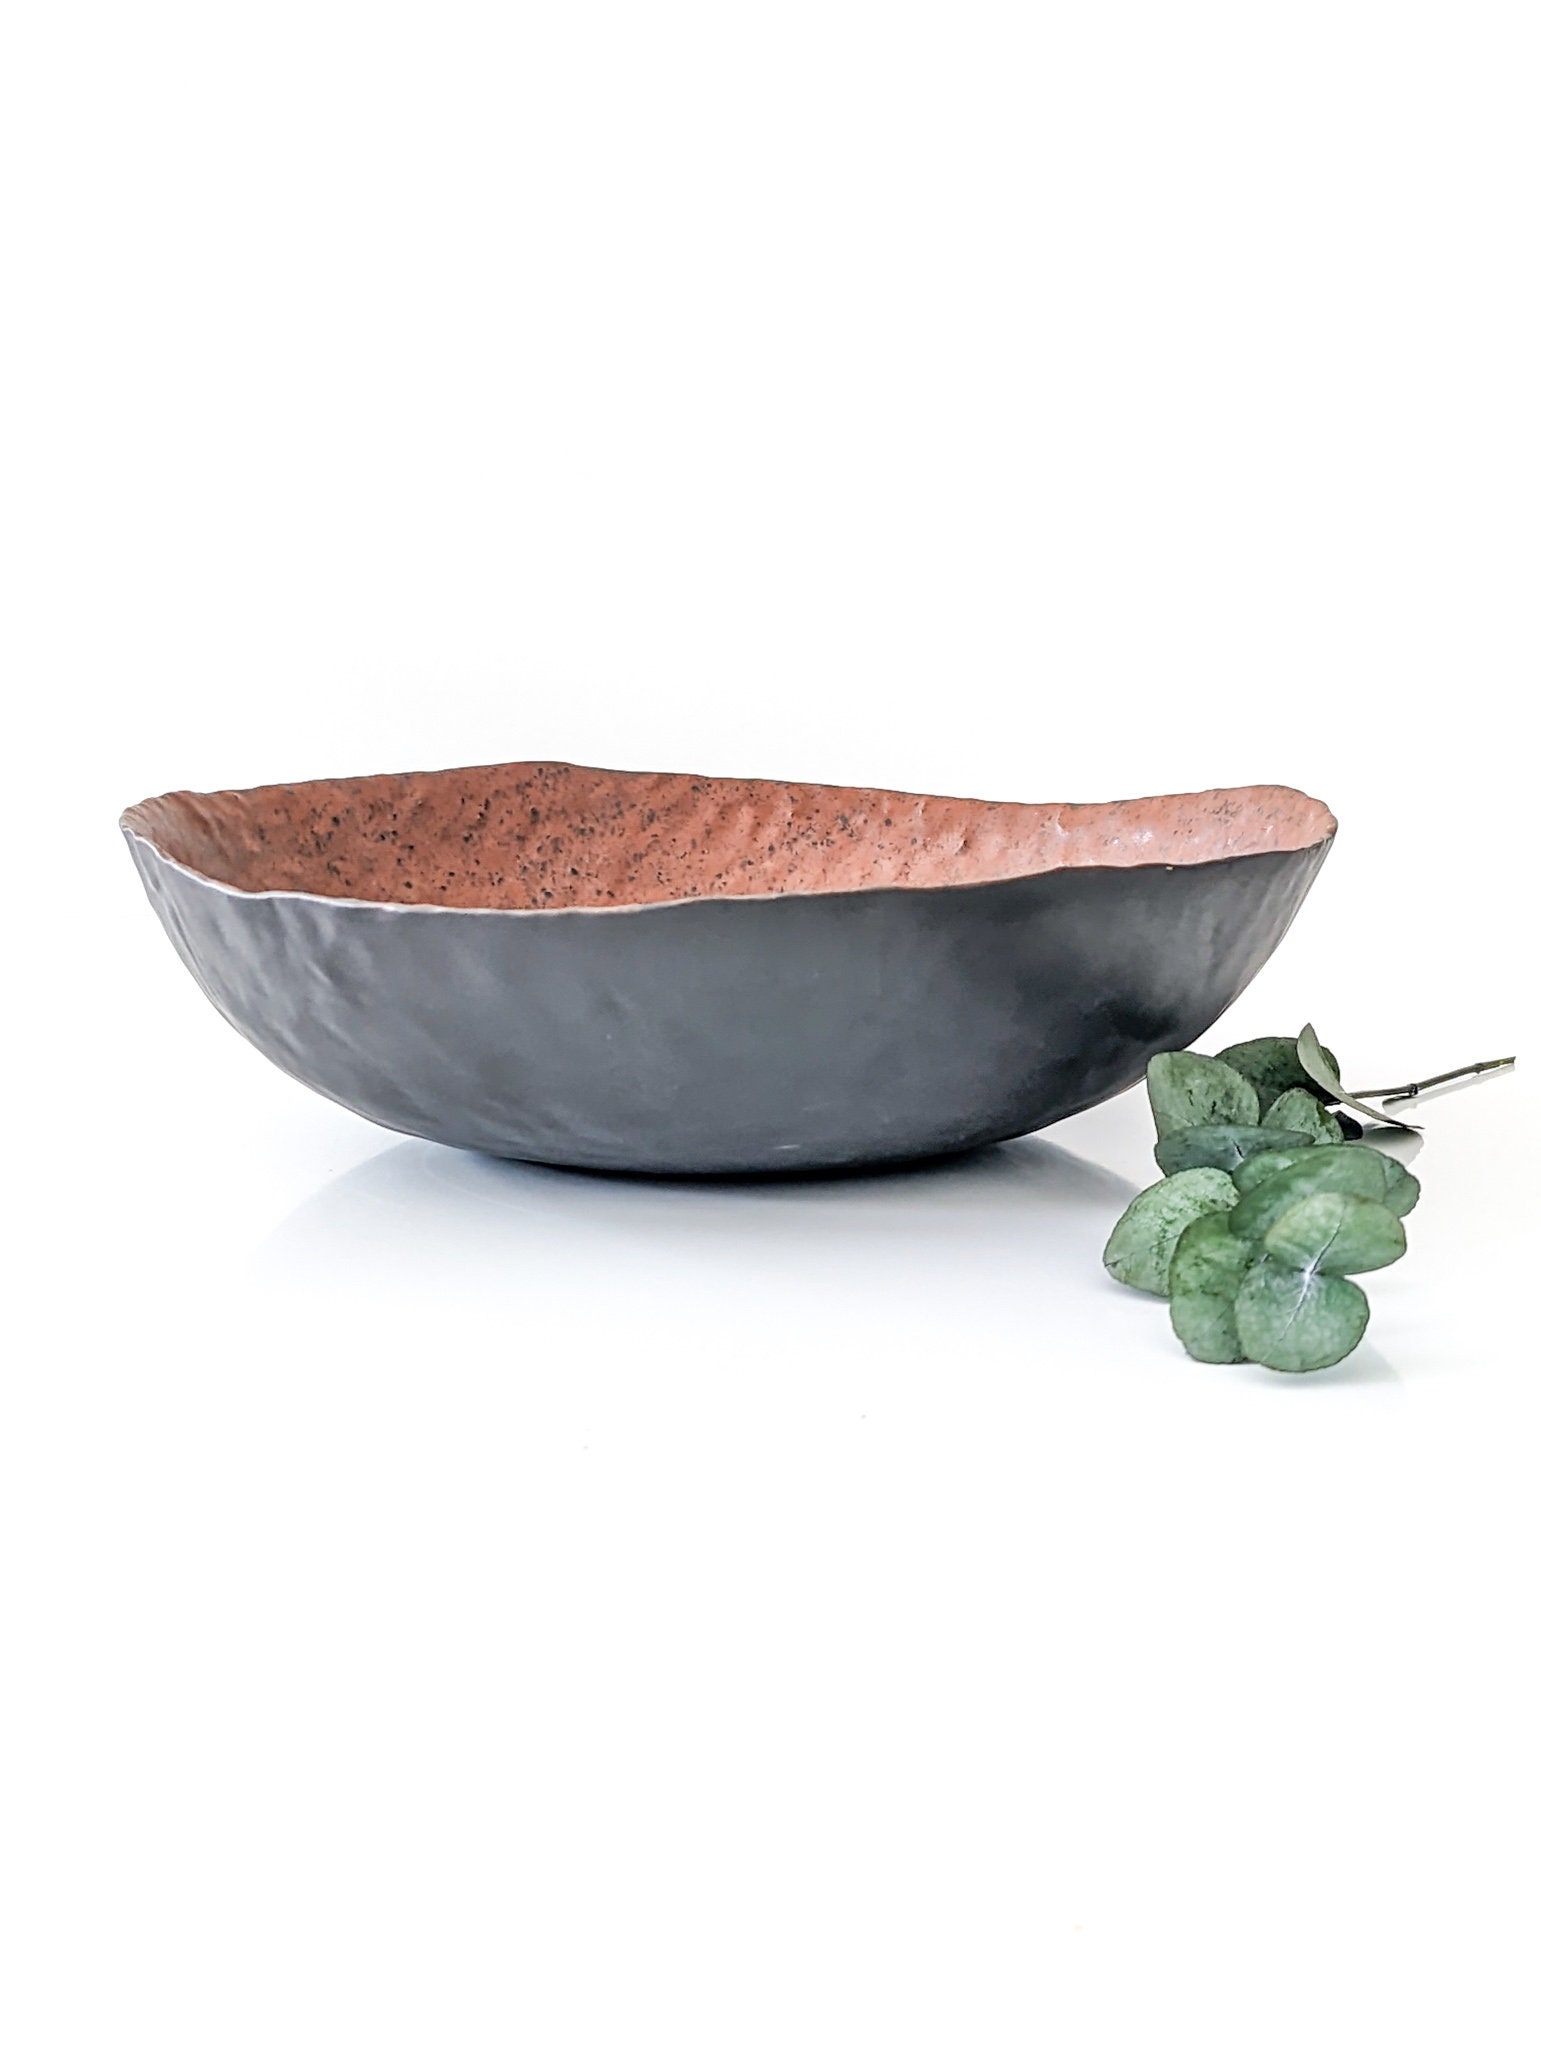 "Bol en céramique : charme et fonctionnalité" (Ceramic Bowl : Charm and Functionality) or "Bol céramique : un design timeless" (Ceramic Bowl : A Timeless Design) could be alternative titles for a French blog post about a ceramic bowl.